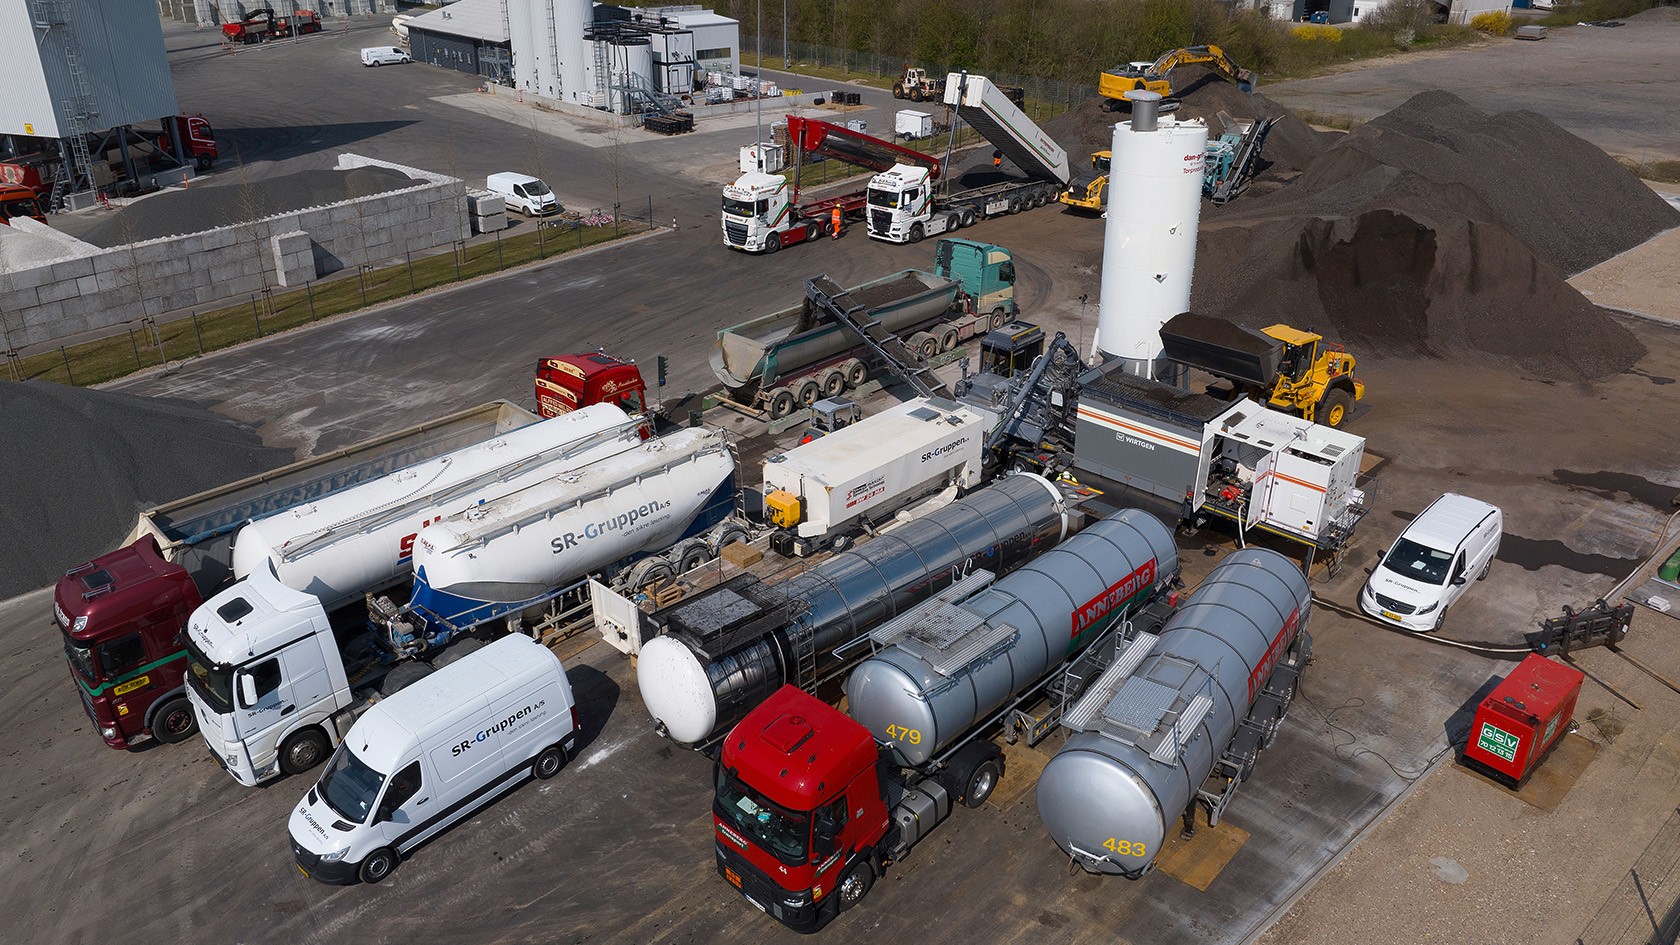 Birds-eye view of a cold mixing plant and a machine fleet at SR-Gruppen A/S.